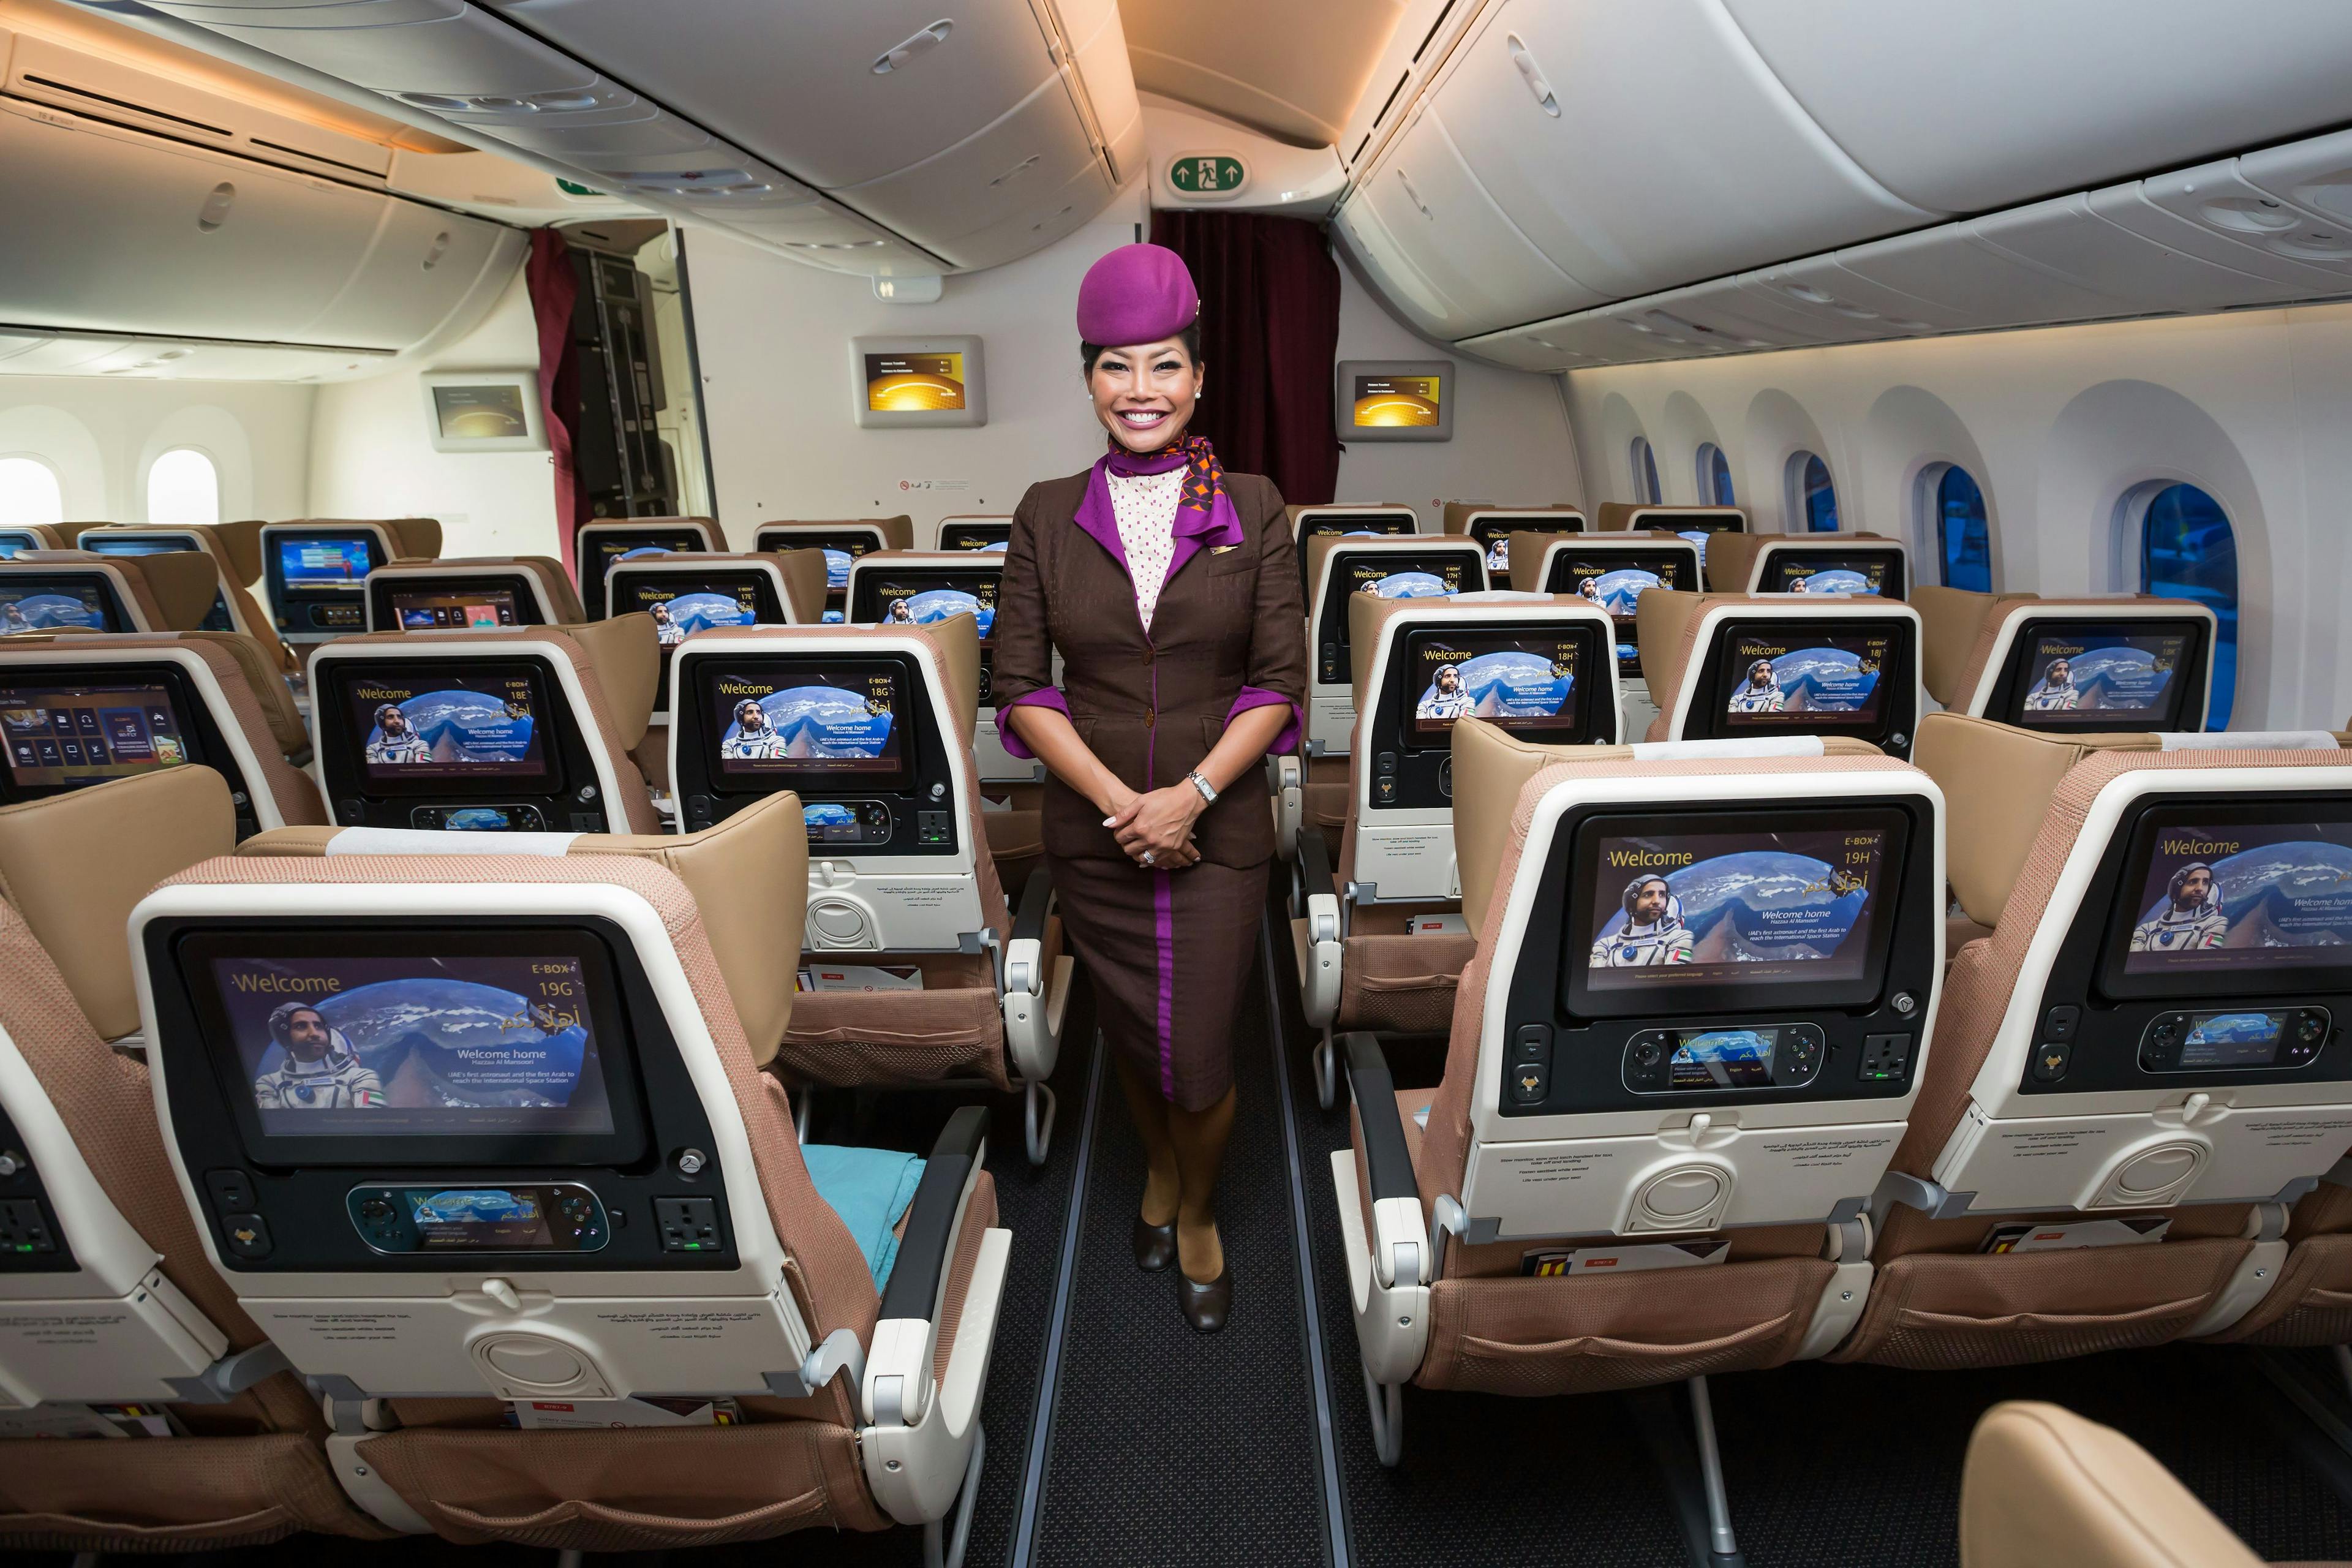 Emirates vs Etihad : Choosing the Best One - cabin and classes